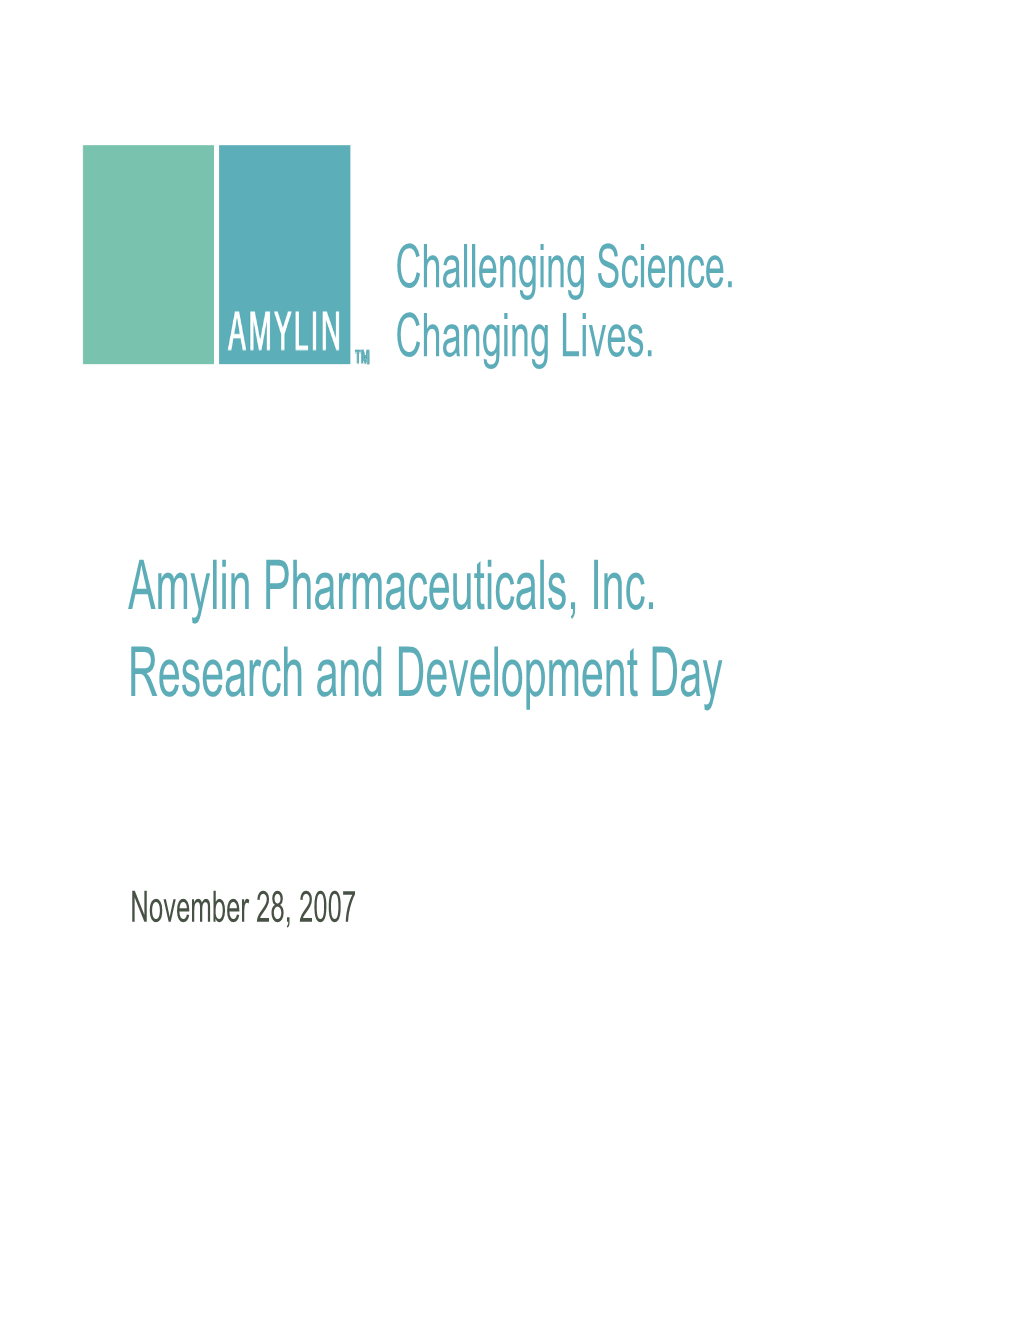 Amylin Pharmaceuticals, Inc. Research and Development Day